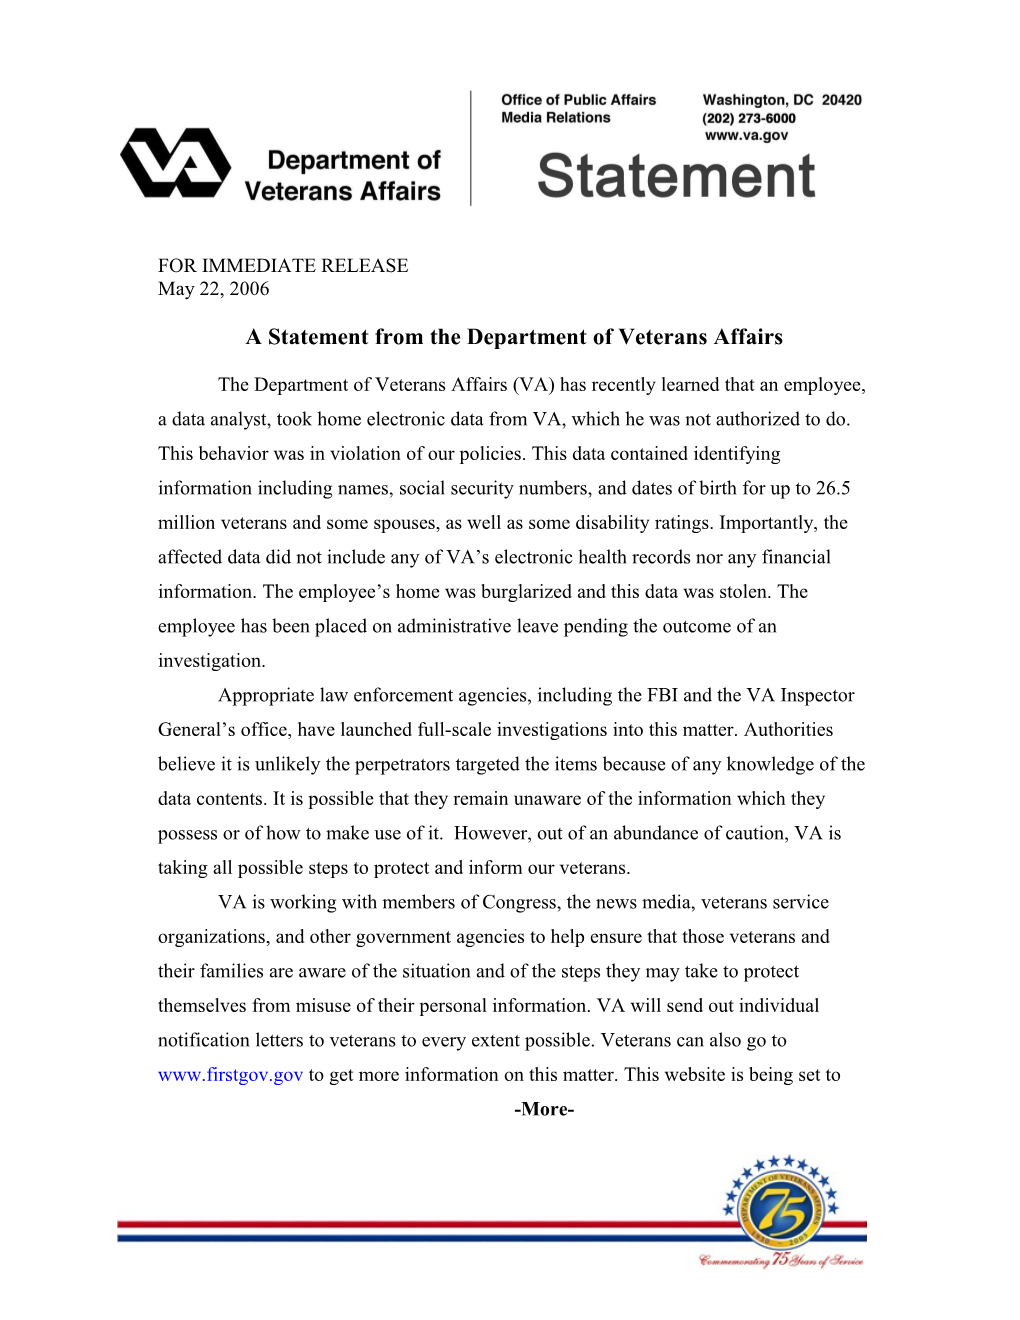 A Statement from the Department of Veterans Affairs